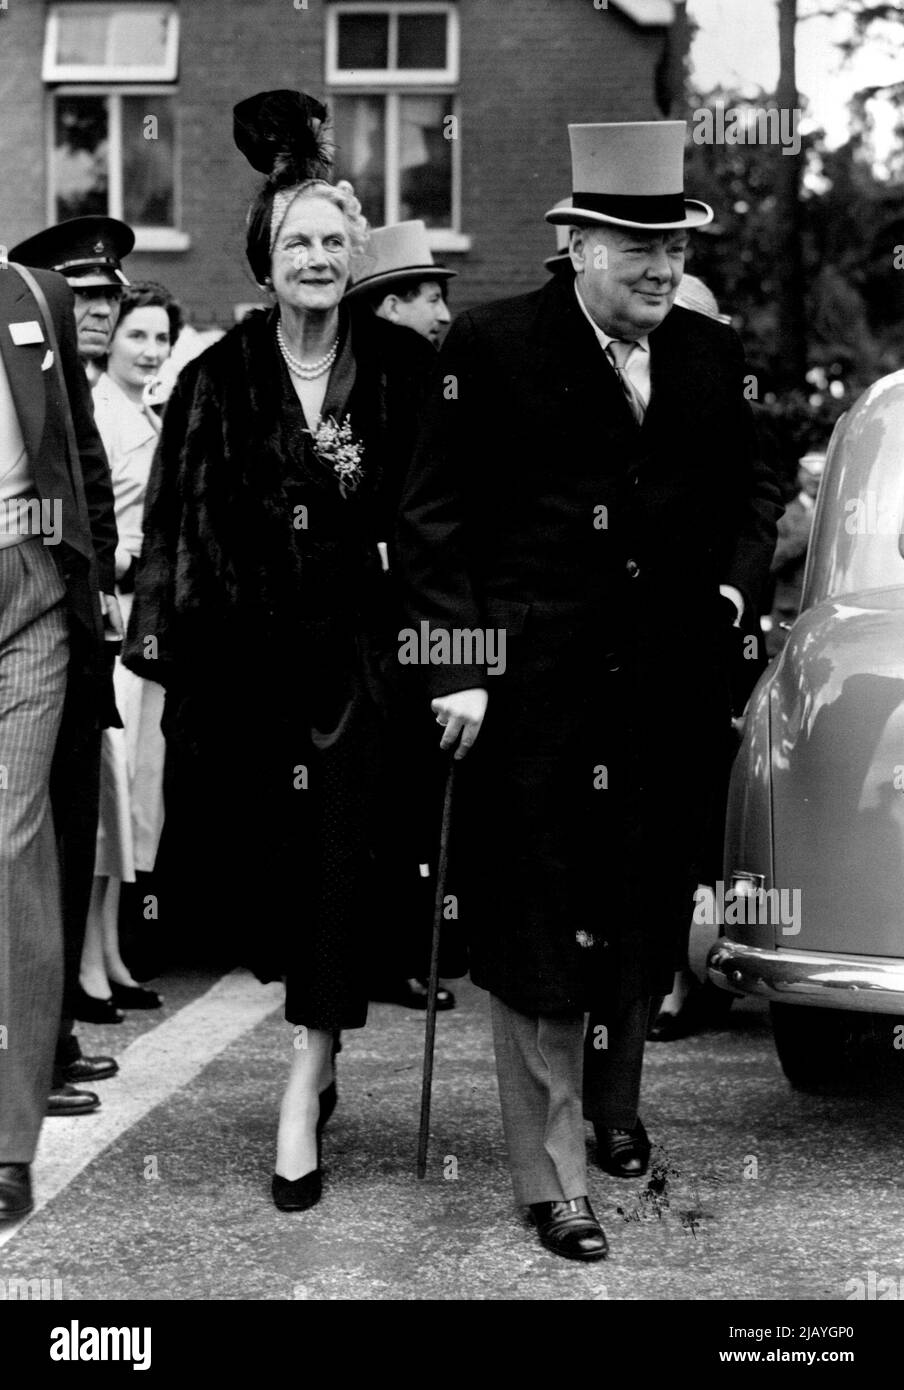 Mr. Winston Churchill Sees Colonist *****: In Ascot topper instead of the proverbial bowler Winston Churchill arrives at the course to the cheers of the bystanders. Mrs. Churchill accompanied him. Mr. and Mrs. Winston Churchill whose car was involved (though not seriously) in an accident en route to the course, today attended the Ascot race meeting to watch Mr. Churchill's colonist II run in the gold cup. June 15, 1950. (Photo by Fox Photos). Stock Photo